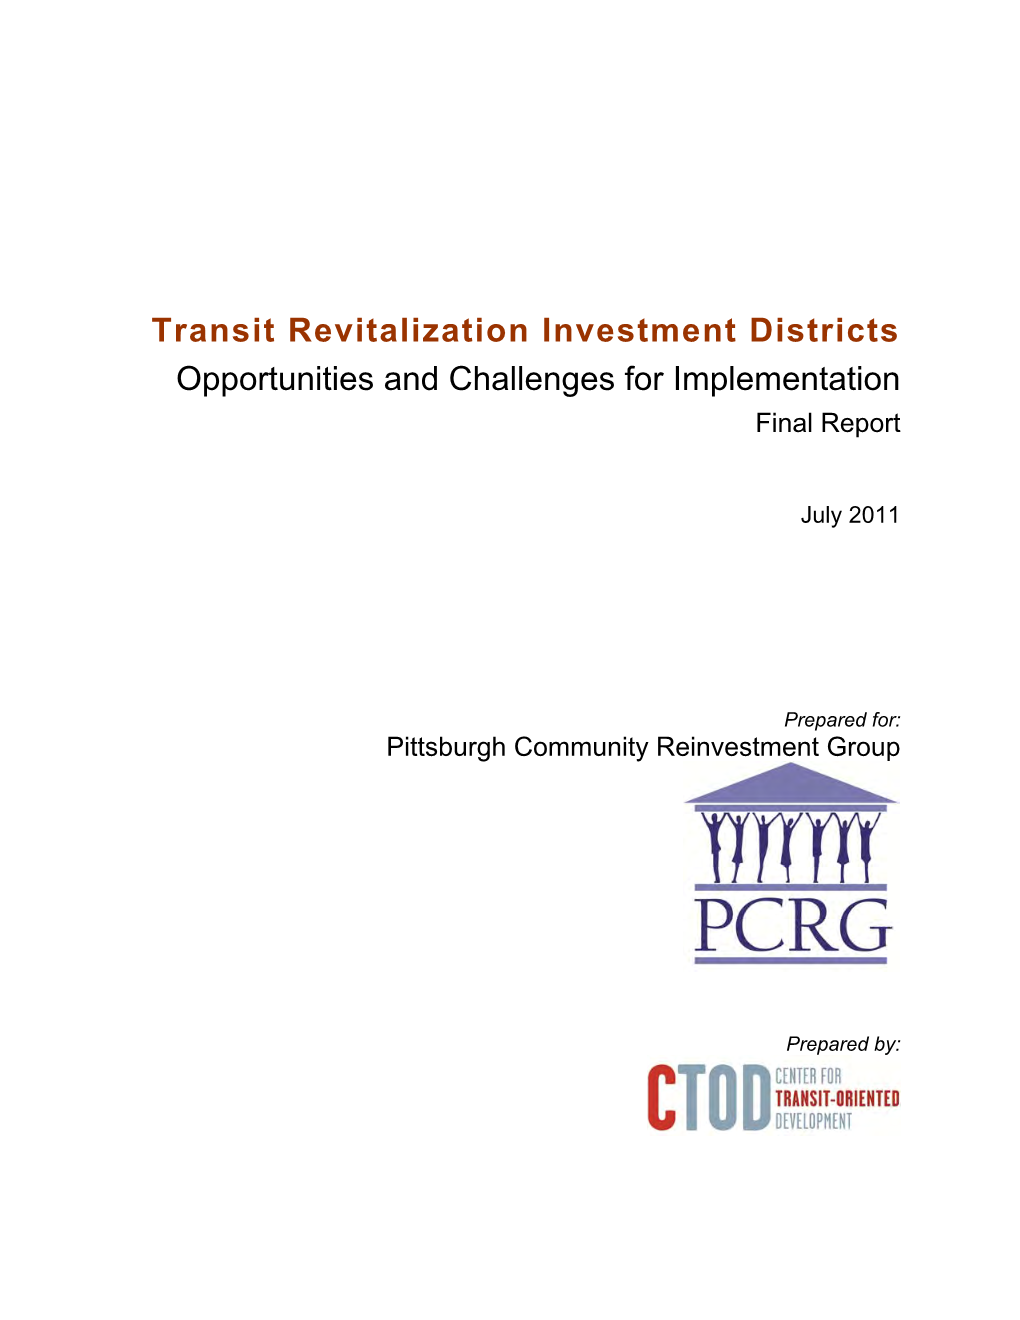 Transit Revitalization Investment Districts Opportunities and Challenges for Implementation Final Report